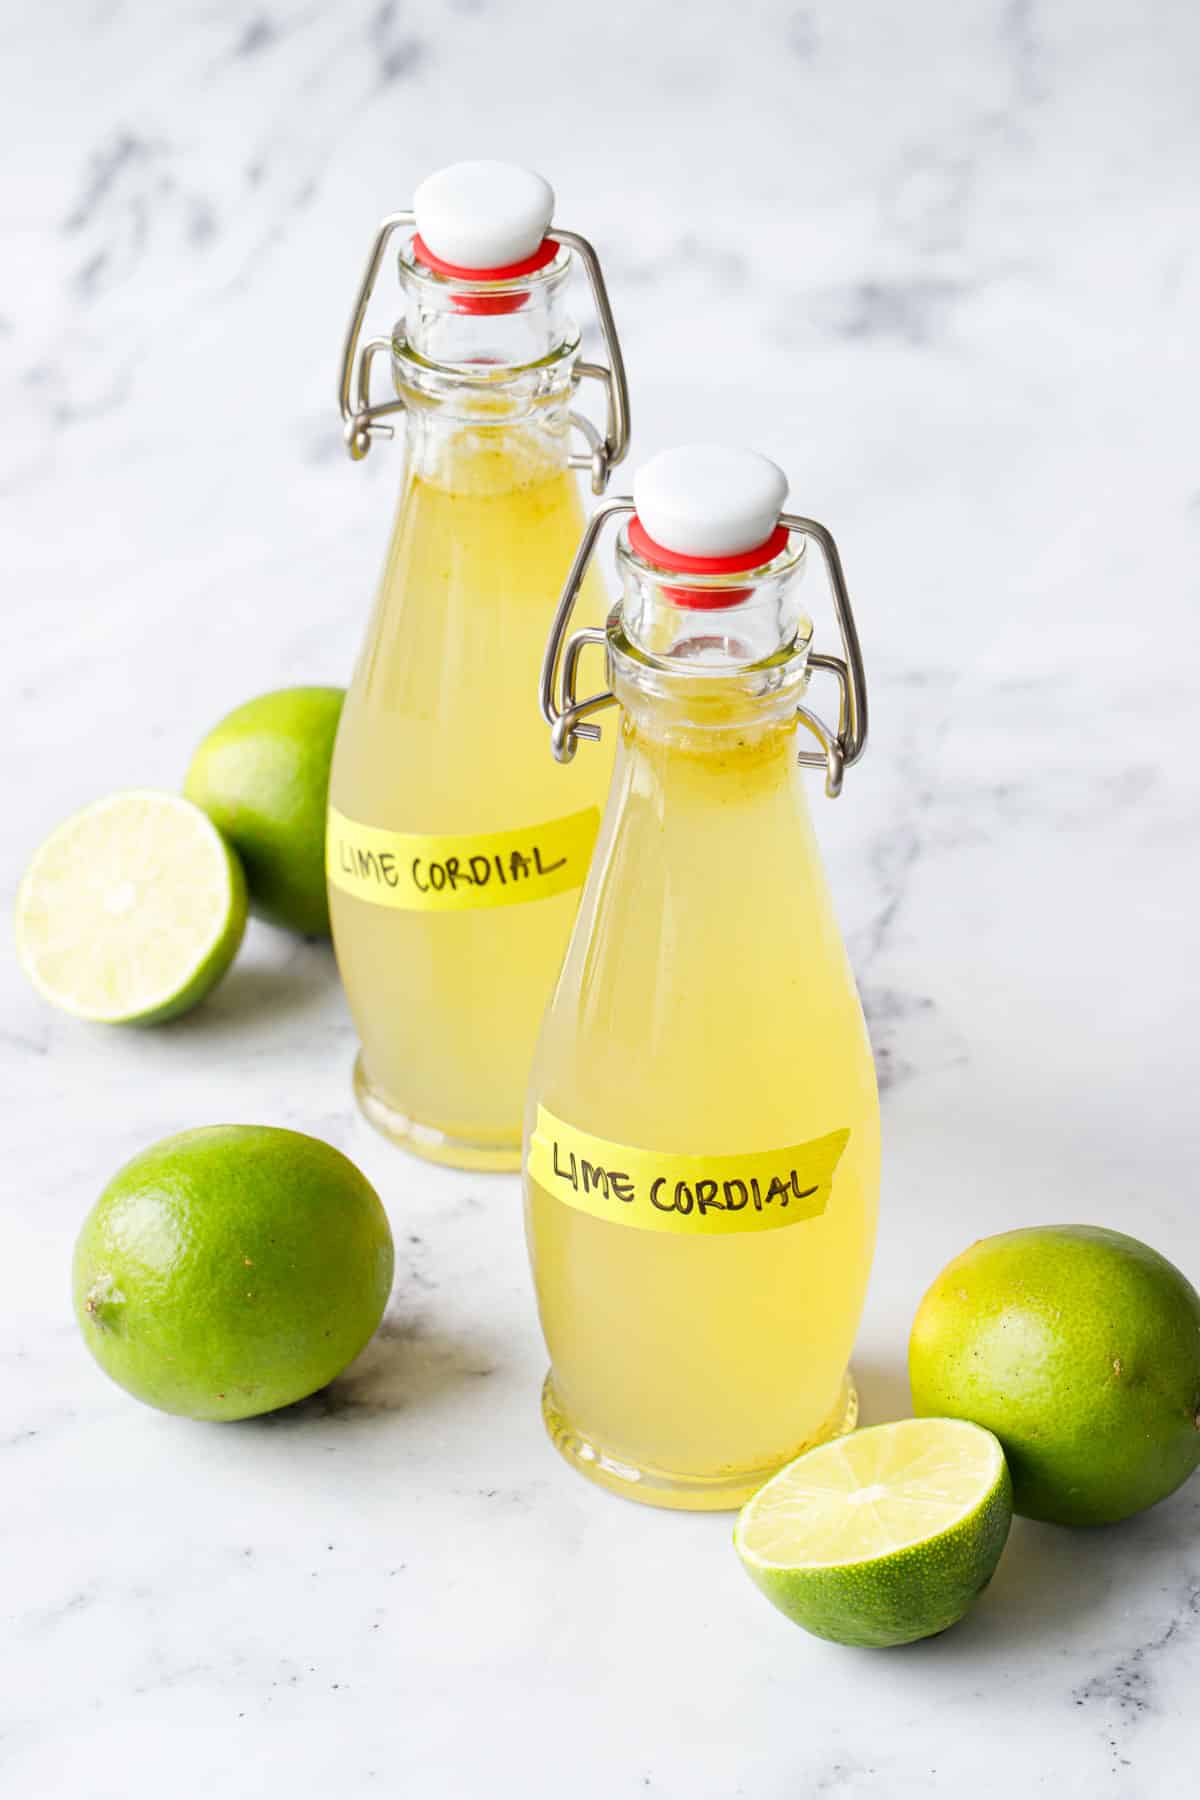 Two swingtop bottles filled with Homemade Lime Cordial on a marble background with fresh limes.